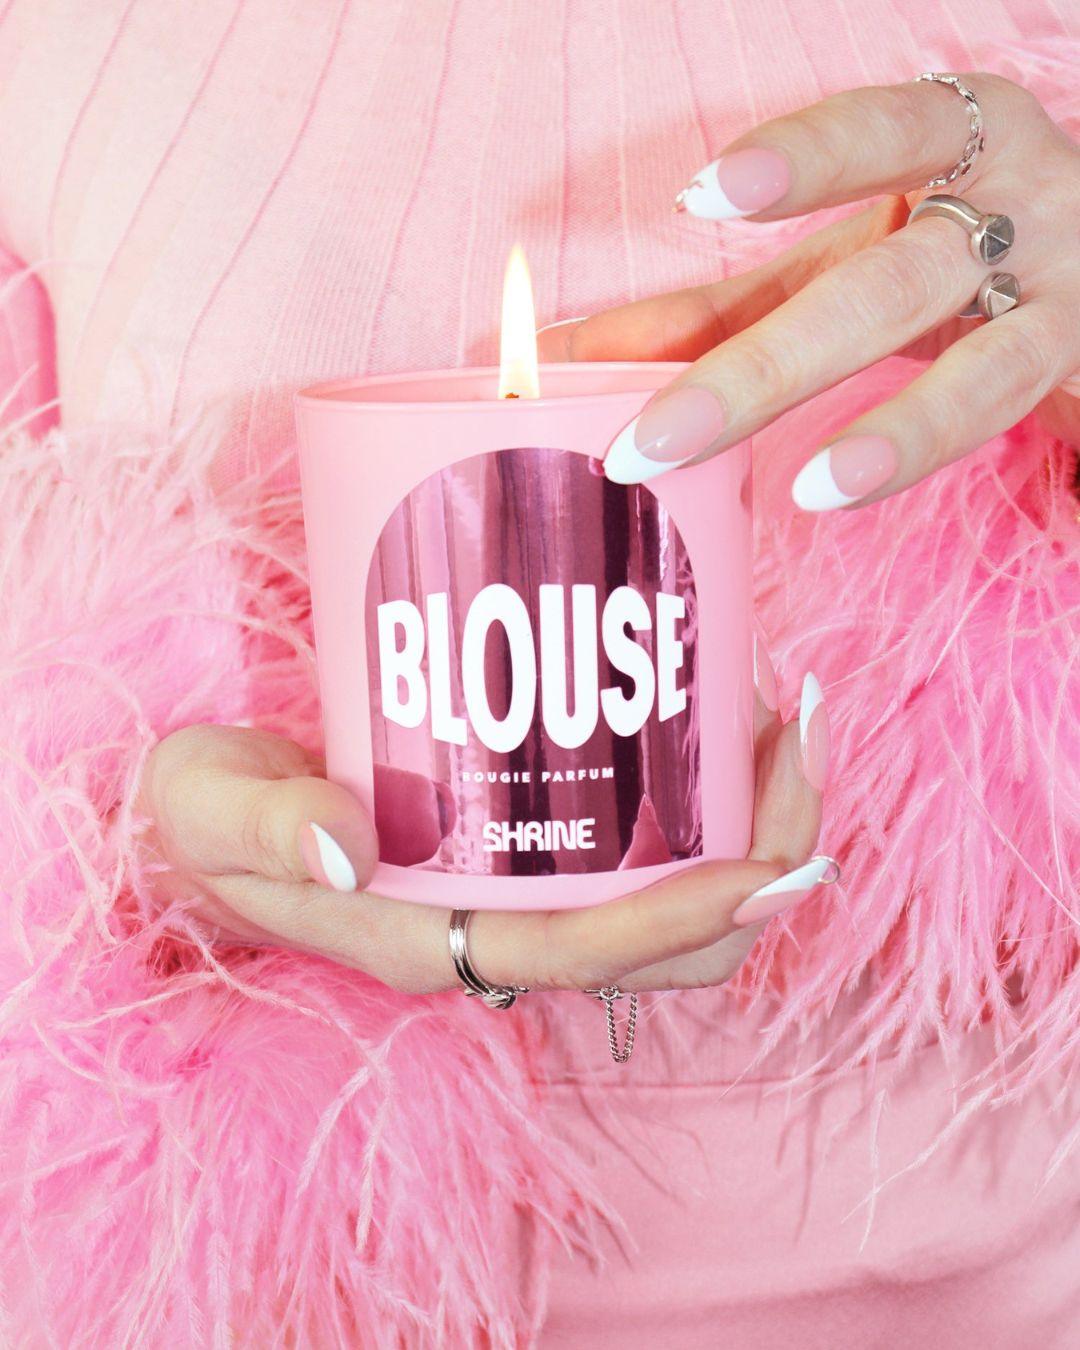 Blouse Candle